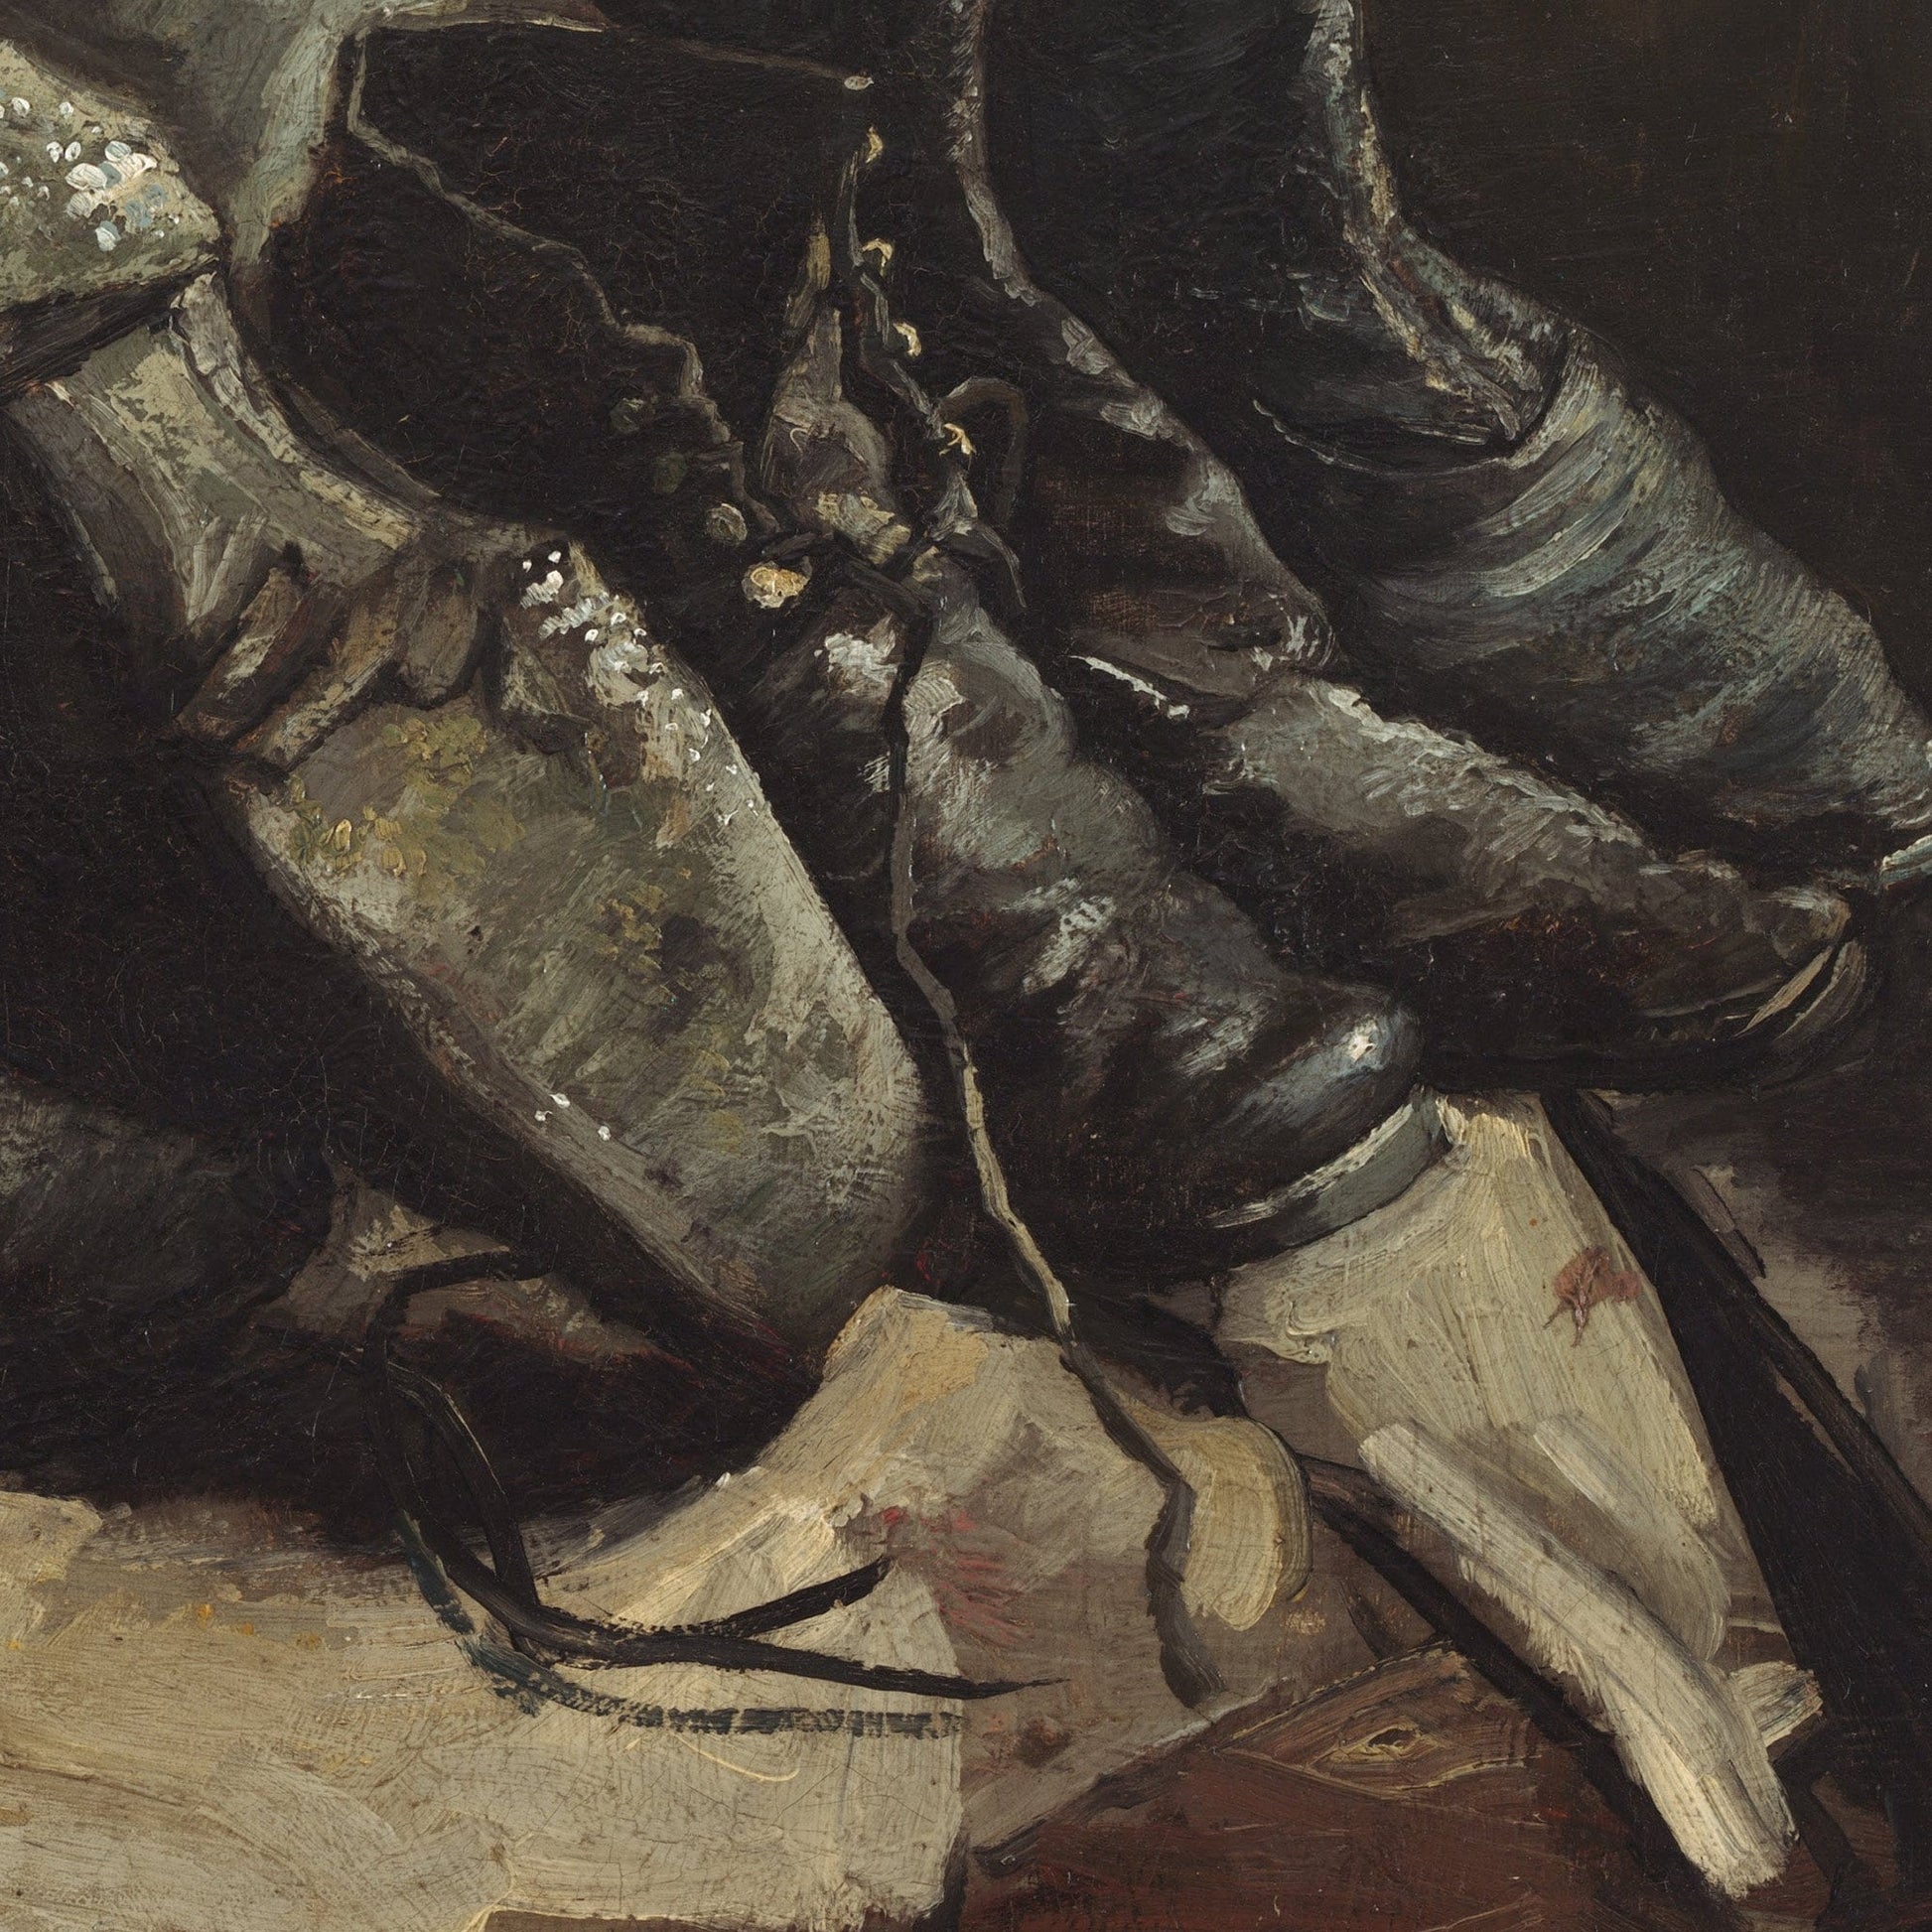 Pairs of Shoes by Vincent Van Gogh, 3d Printed with texture and brush strokes looks like original oil-painting, code:445